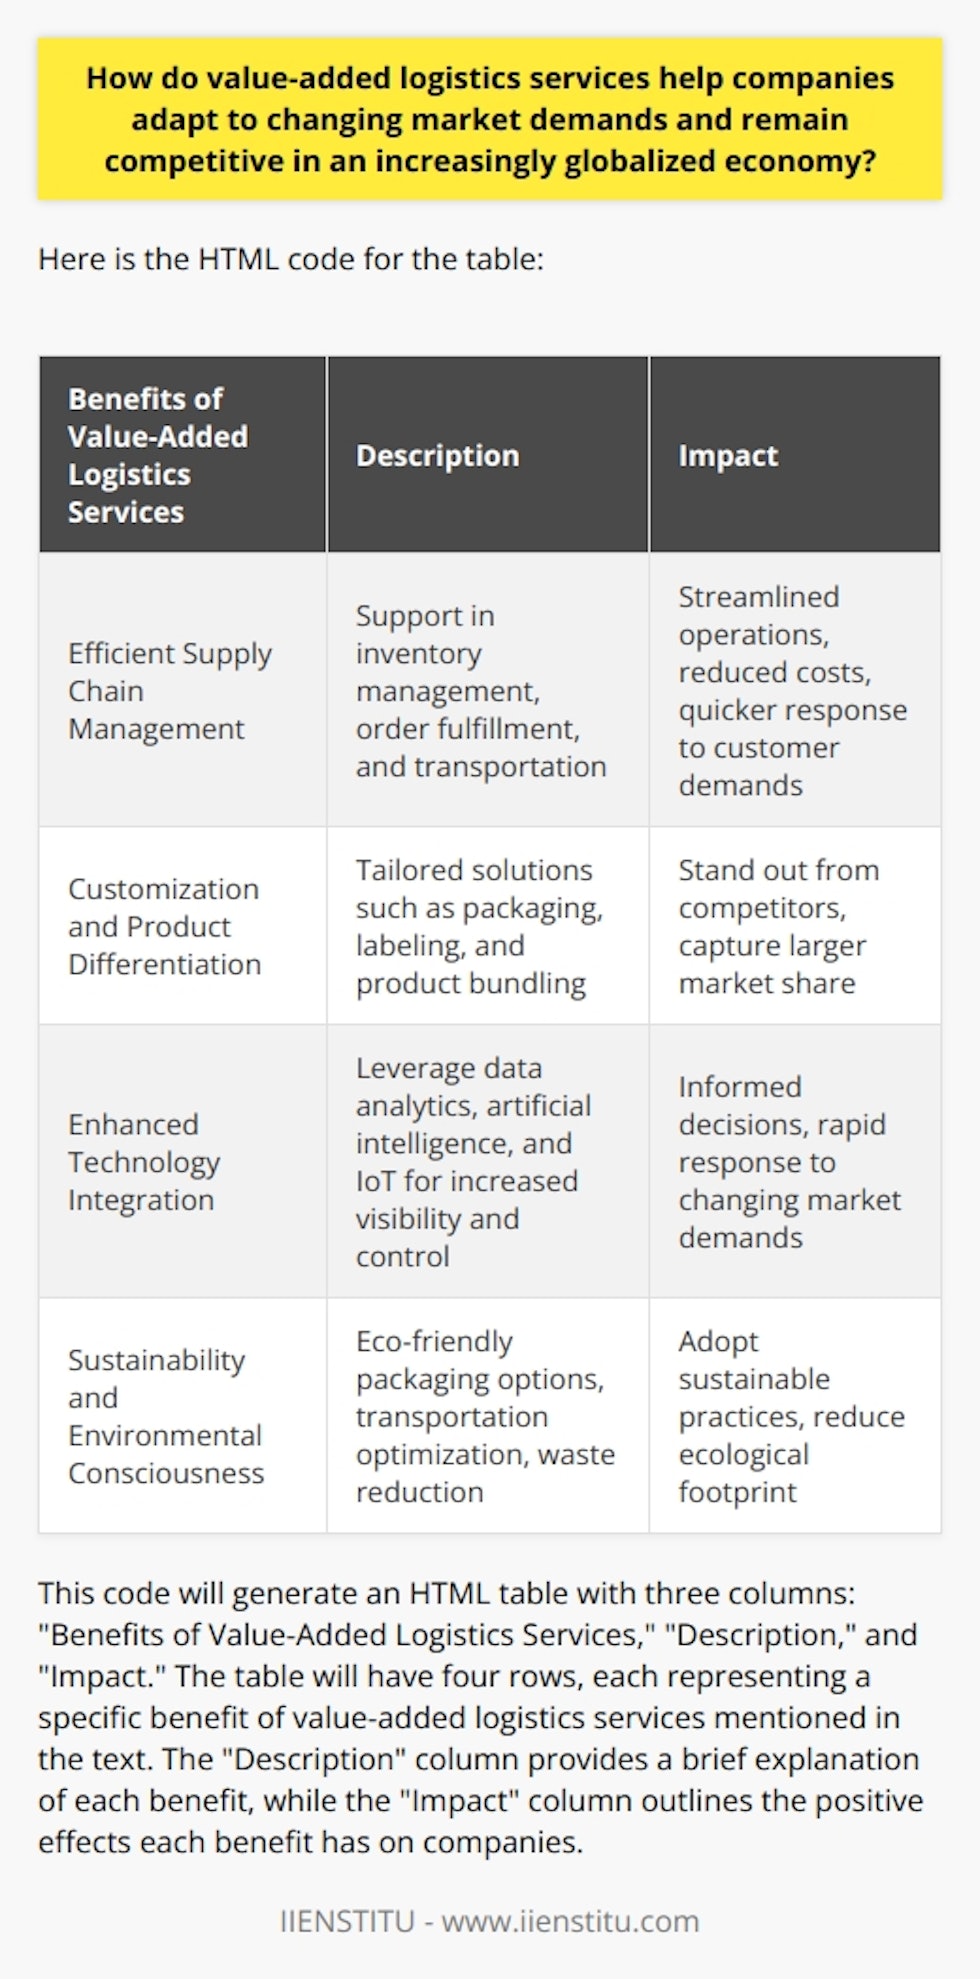 Value-added logistics services are essential for companies looking to adapt to changing market demands and stay competitive in a globalized economy. These services help businesses optimize their supply chain operations, customize products and services, integrate advanced technology, and promote sustainability. By leveraging these services, companies can respond effectively to market fluctuations, meet customer expectations, and secure a competitive edge.	extbf{Efficient Supply Chain Management}Value-added logistics services contribute to the improvement of supply chain management. These services offer companies support in inventory management, order fulfillment, and transportation. By optimizing these processes, businesses can streamline their operations, reduce costs, and enhance efficiency. This allows for quicker response times to customer demands and ultimately leads to a stronger position in the market.	extbf{Customization and Product Differentiation}In an increasingly globalized economy, customization and product differentiation are vital for companies to maintain competitiveness. Value-added logistics providers offer tailored solutions, such as packaging, labeling, and product bundling, to meet specific customer requirements. By differentiating their products and services, businesses can stand out from competitors and capture a larger share of the market.	extbf{Enhanced Technology Integration}Advanced technology integration is a crucial aspect of value-added logistics services. Providers leverage technologies like data analytics, artificial intelligence, and the Internet of Things (IoT) to offer increased visibility and control over supply chain operations. Real-time monitoring and analysis of trends enable businesses to make informed decisions and respond rapidly to changing market demands. By leveraging these technologies, companies can adapt more effectively and maintain a competitive edge.	extbf{Sustainability and Environmental Consciousness}Promoting sustainability and environmental consciousness is becoming increasingly important for businesses in today's market. Value-added logistics providers play a crucial role in helping companies adopt sustainable practices and reduce their ecological footprint. These services offer eco-friendly packaging options, transportation optimization strategies, and waste reduction solutions. By embracing these sustainability initiatives, companies can navigate the transition towards a greener economy and remain competitive in a rapidly changing global market.In conclusion, value-added logistics services are a valuable resource for companies aiming to adapt to changing market demands and remain competitive in a globalized economy. By optimizing supply chain management, enabling customization and product differentiation, integrating advanced technologies, and promoting sustainability, value-added logistics providers empower businesses to thrive in an ever-evolving market landscape.